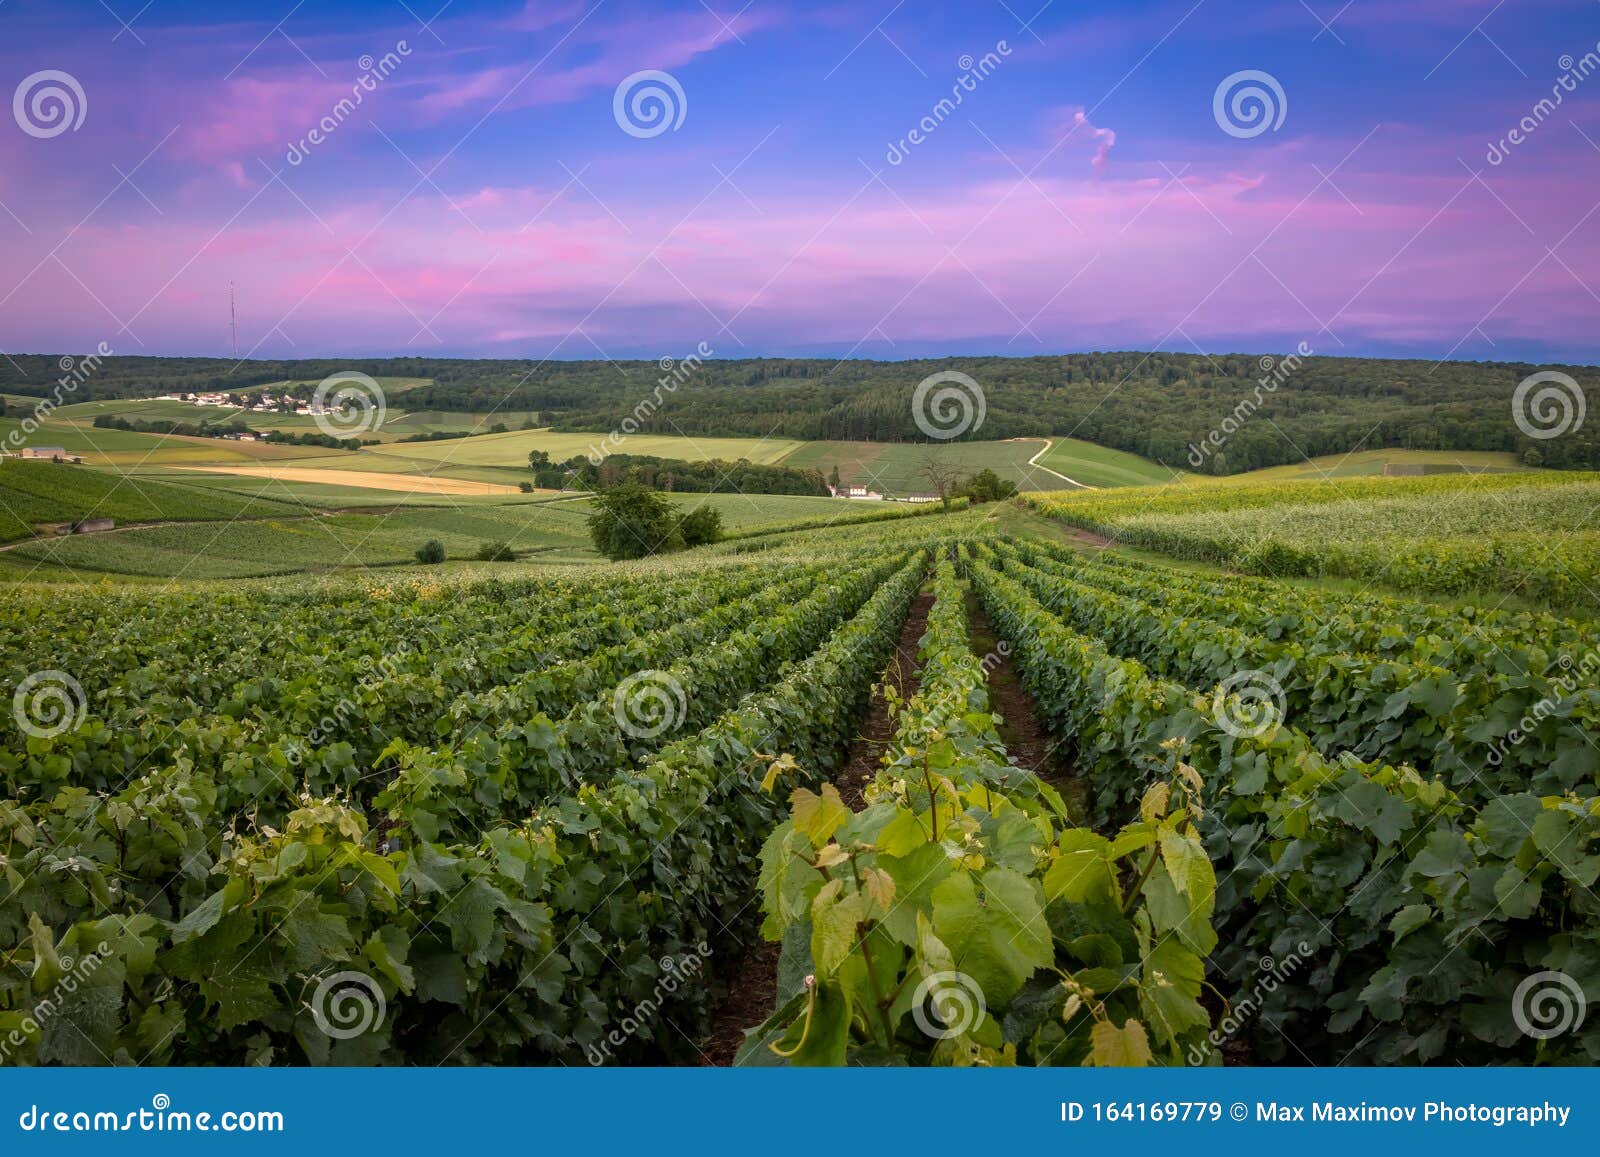 fleury-la-rivier, france - sunset view of the hillsides of champagne